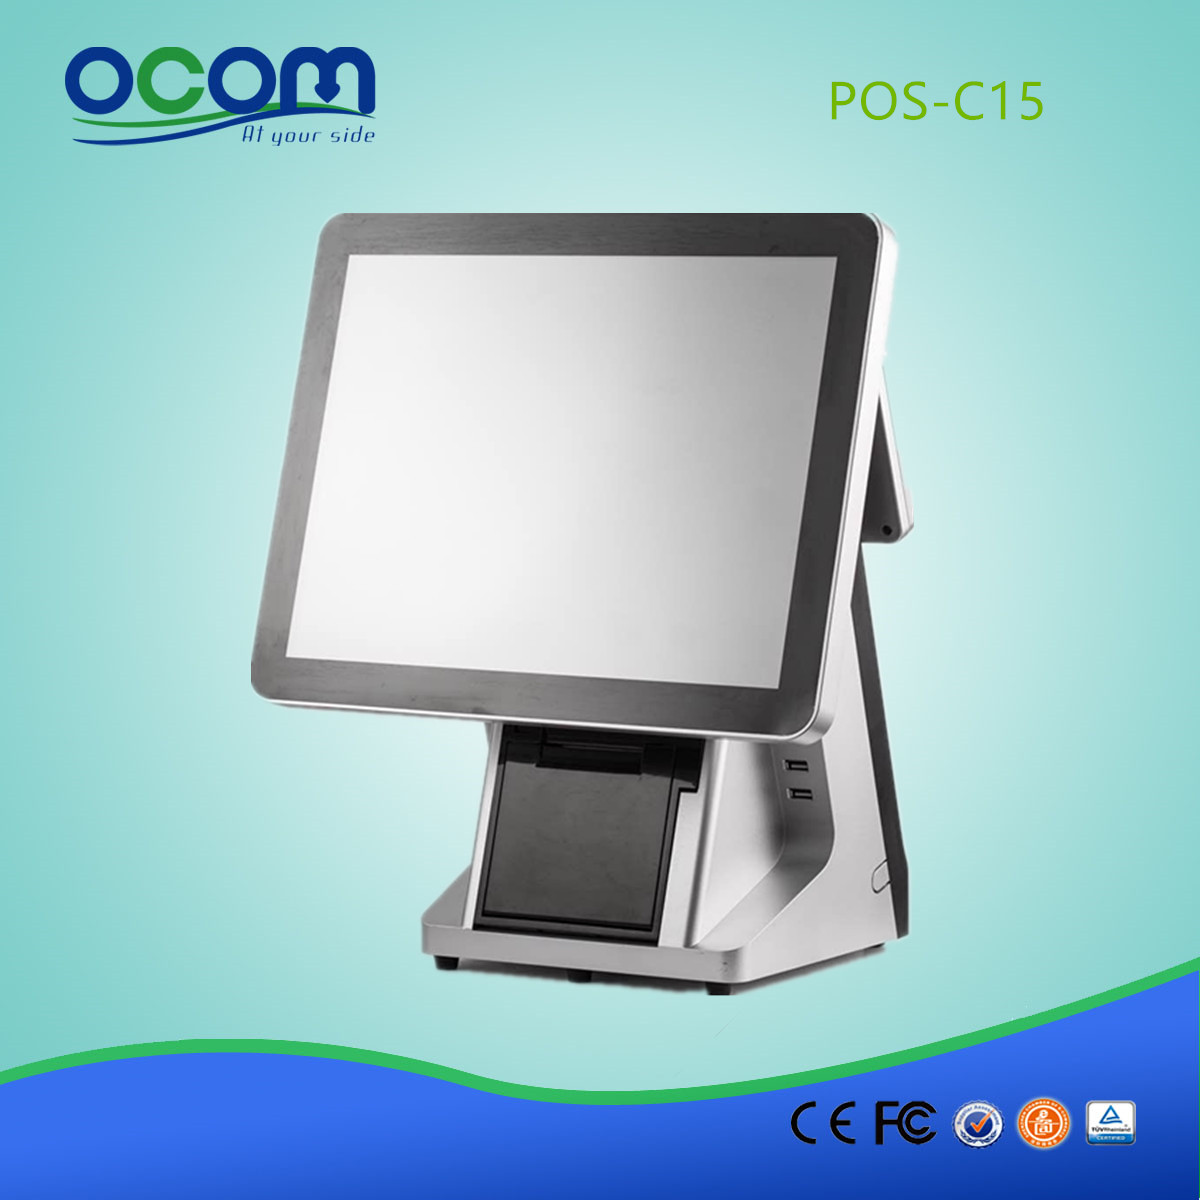 POS-C15-China fabriek alles in een touch-screen Android smart pos terminal